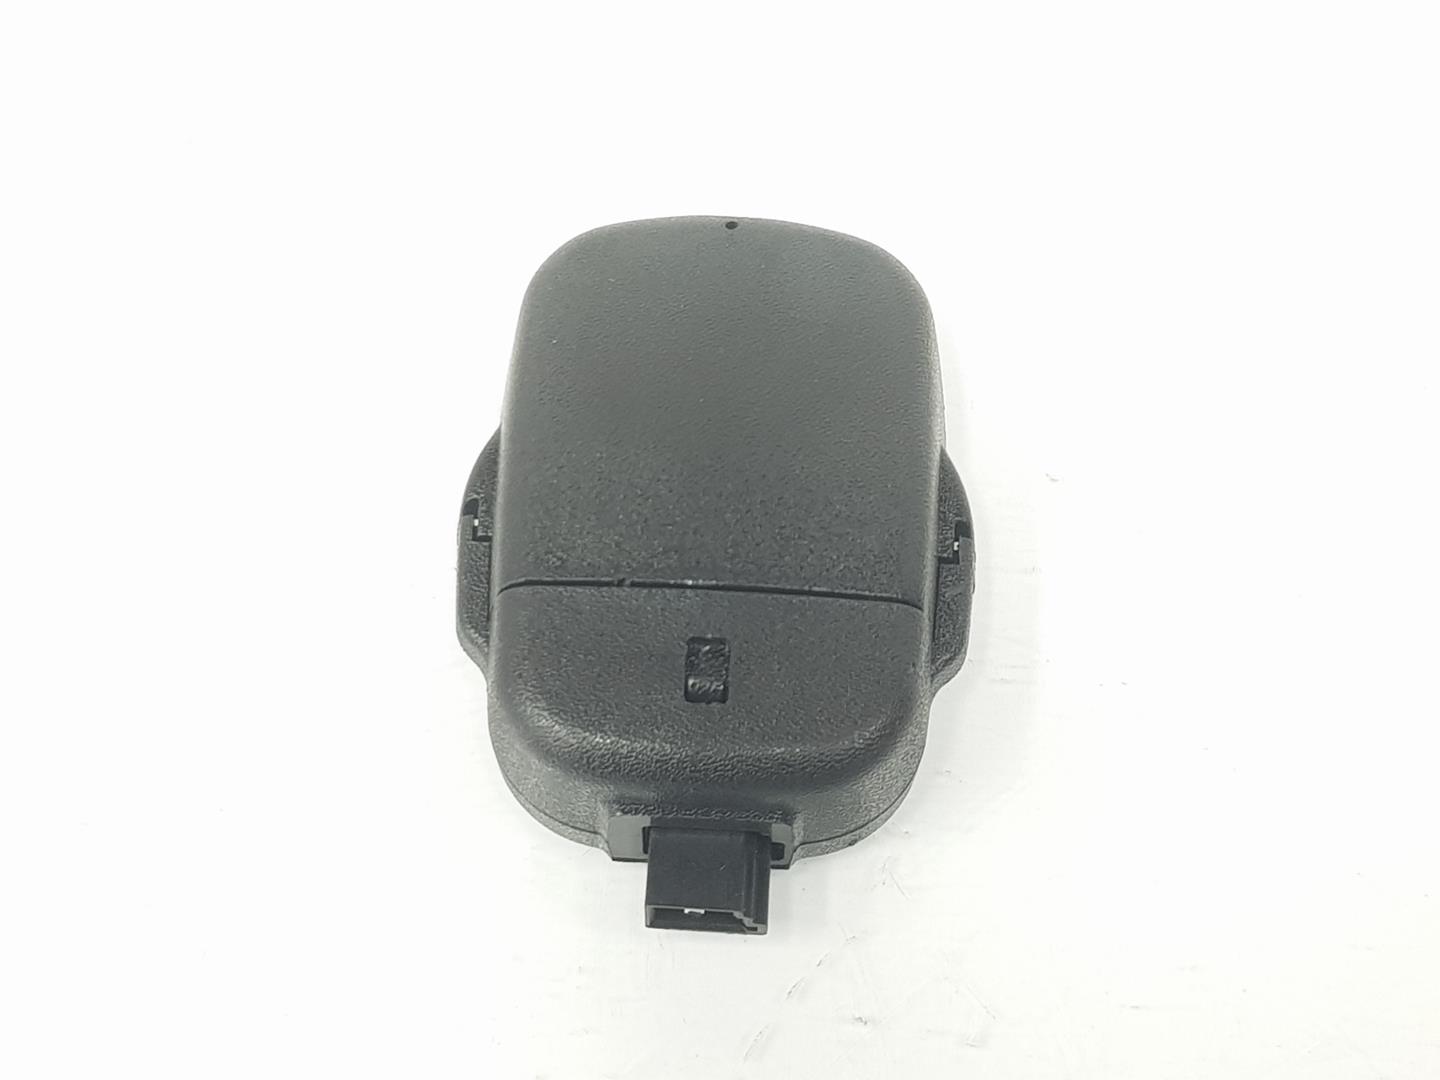 OPEL Insignia A (2008-2016) Other Control Units 22845143, 22845143 19926019